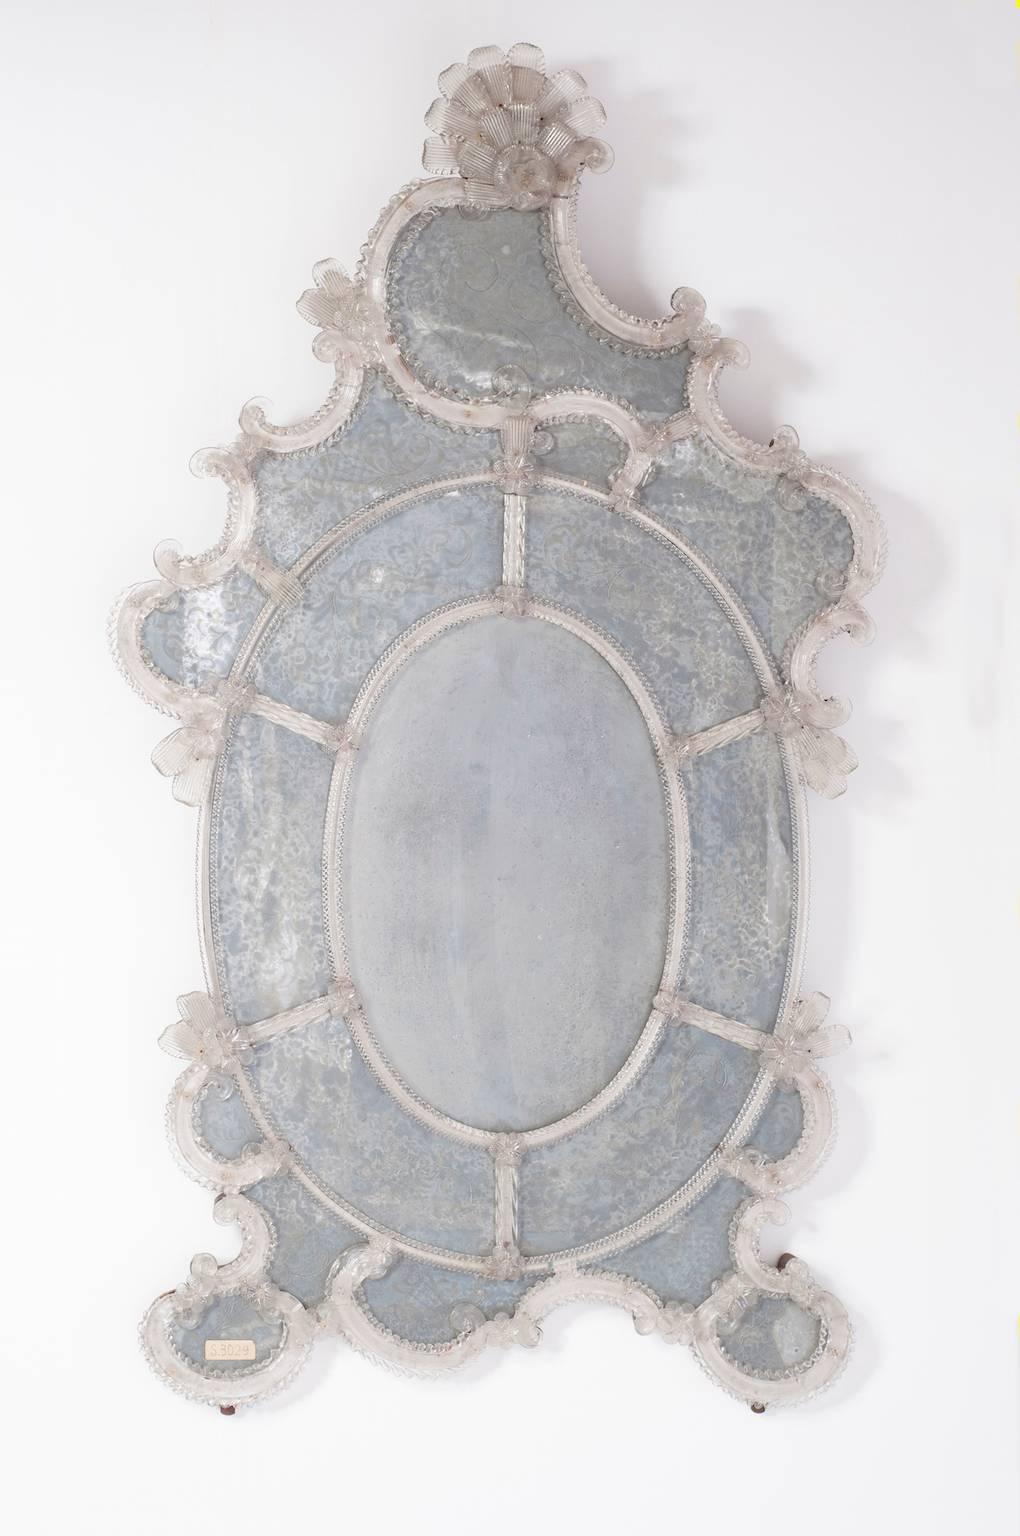 Italian Murano Mirror from the early 19th century, attributed to Pauly & Co.
This mirror is an authentic masterpiece in clear color, with incredible hand engravings on the mirror. All the glass parts are in perfect condition without any damage.
The